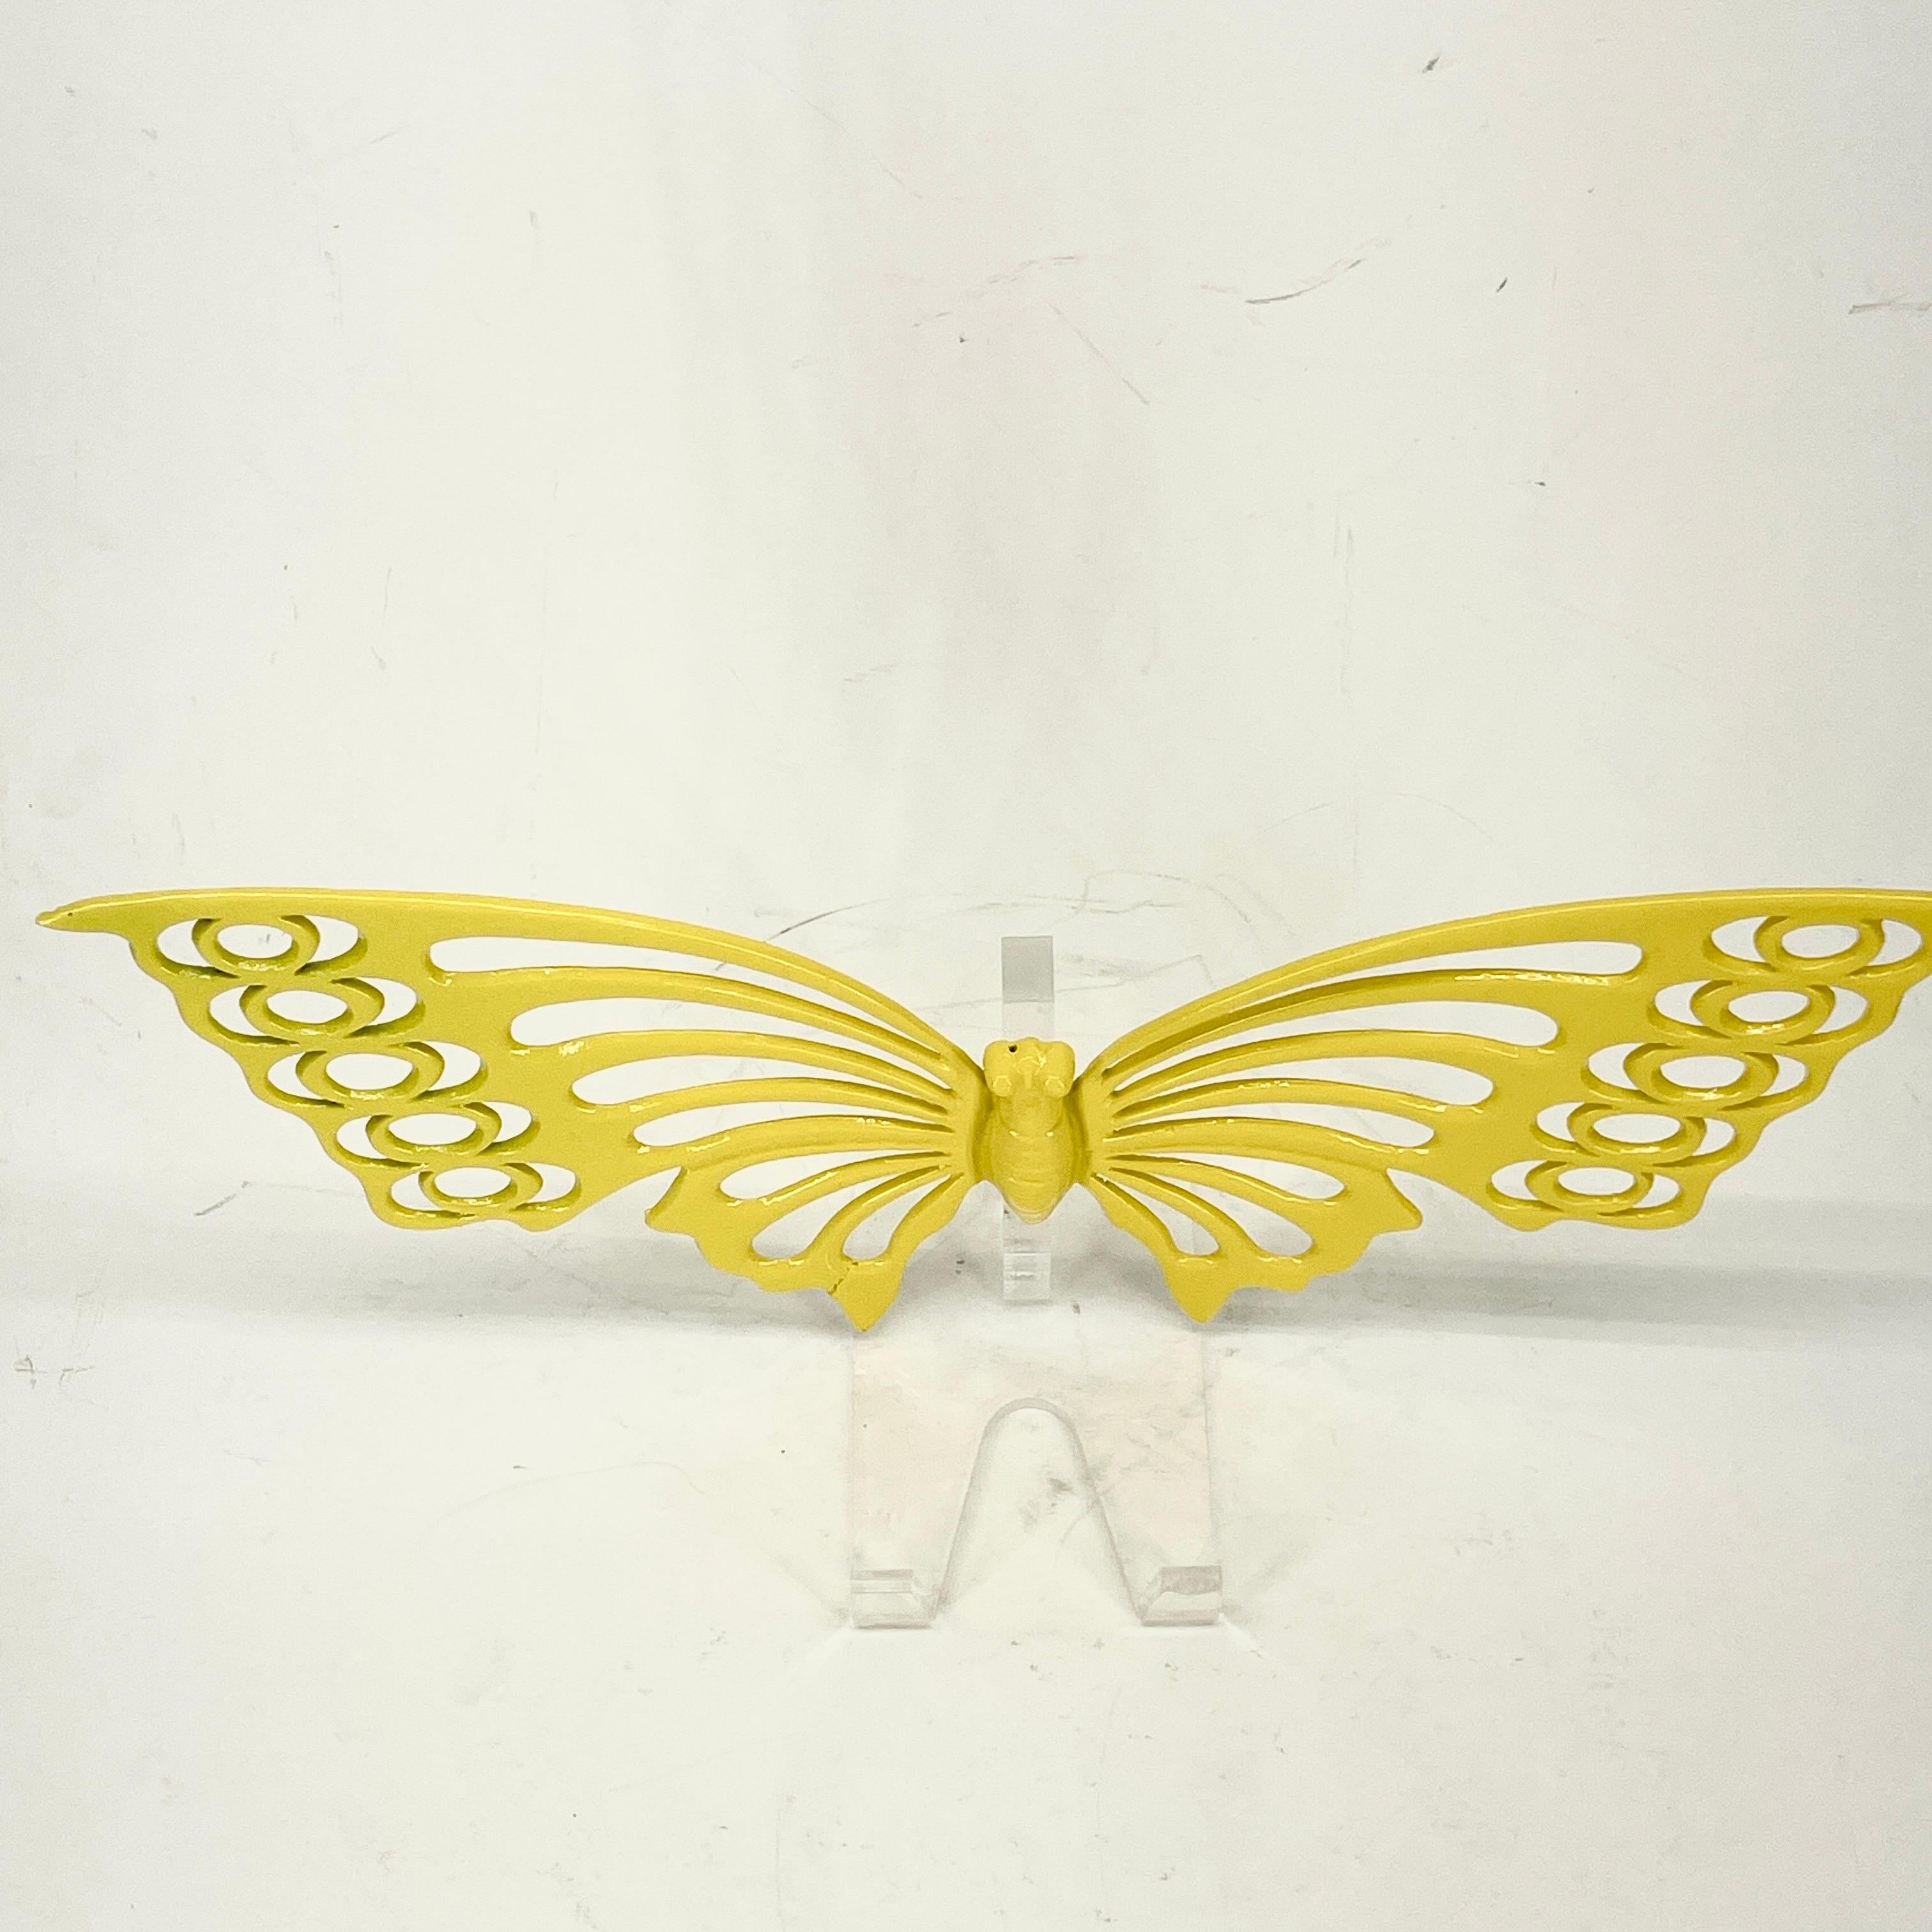 Large Brass Midcentury Butterfly Sculpture in Bright Yellow Powder-Coat For Sale 13